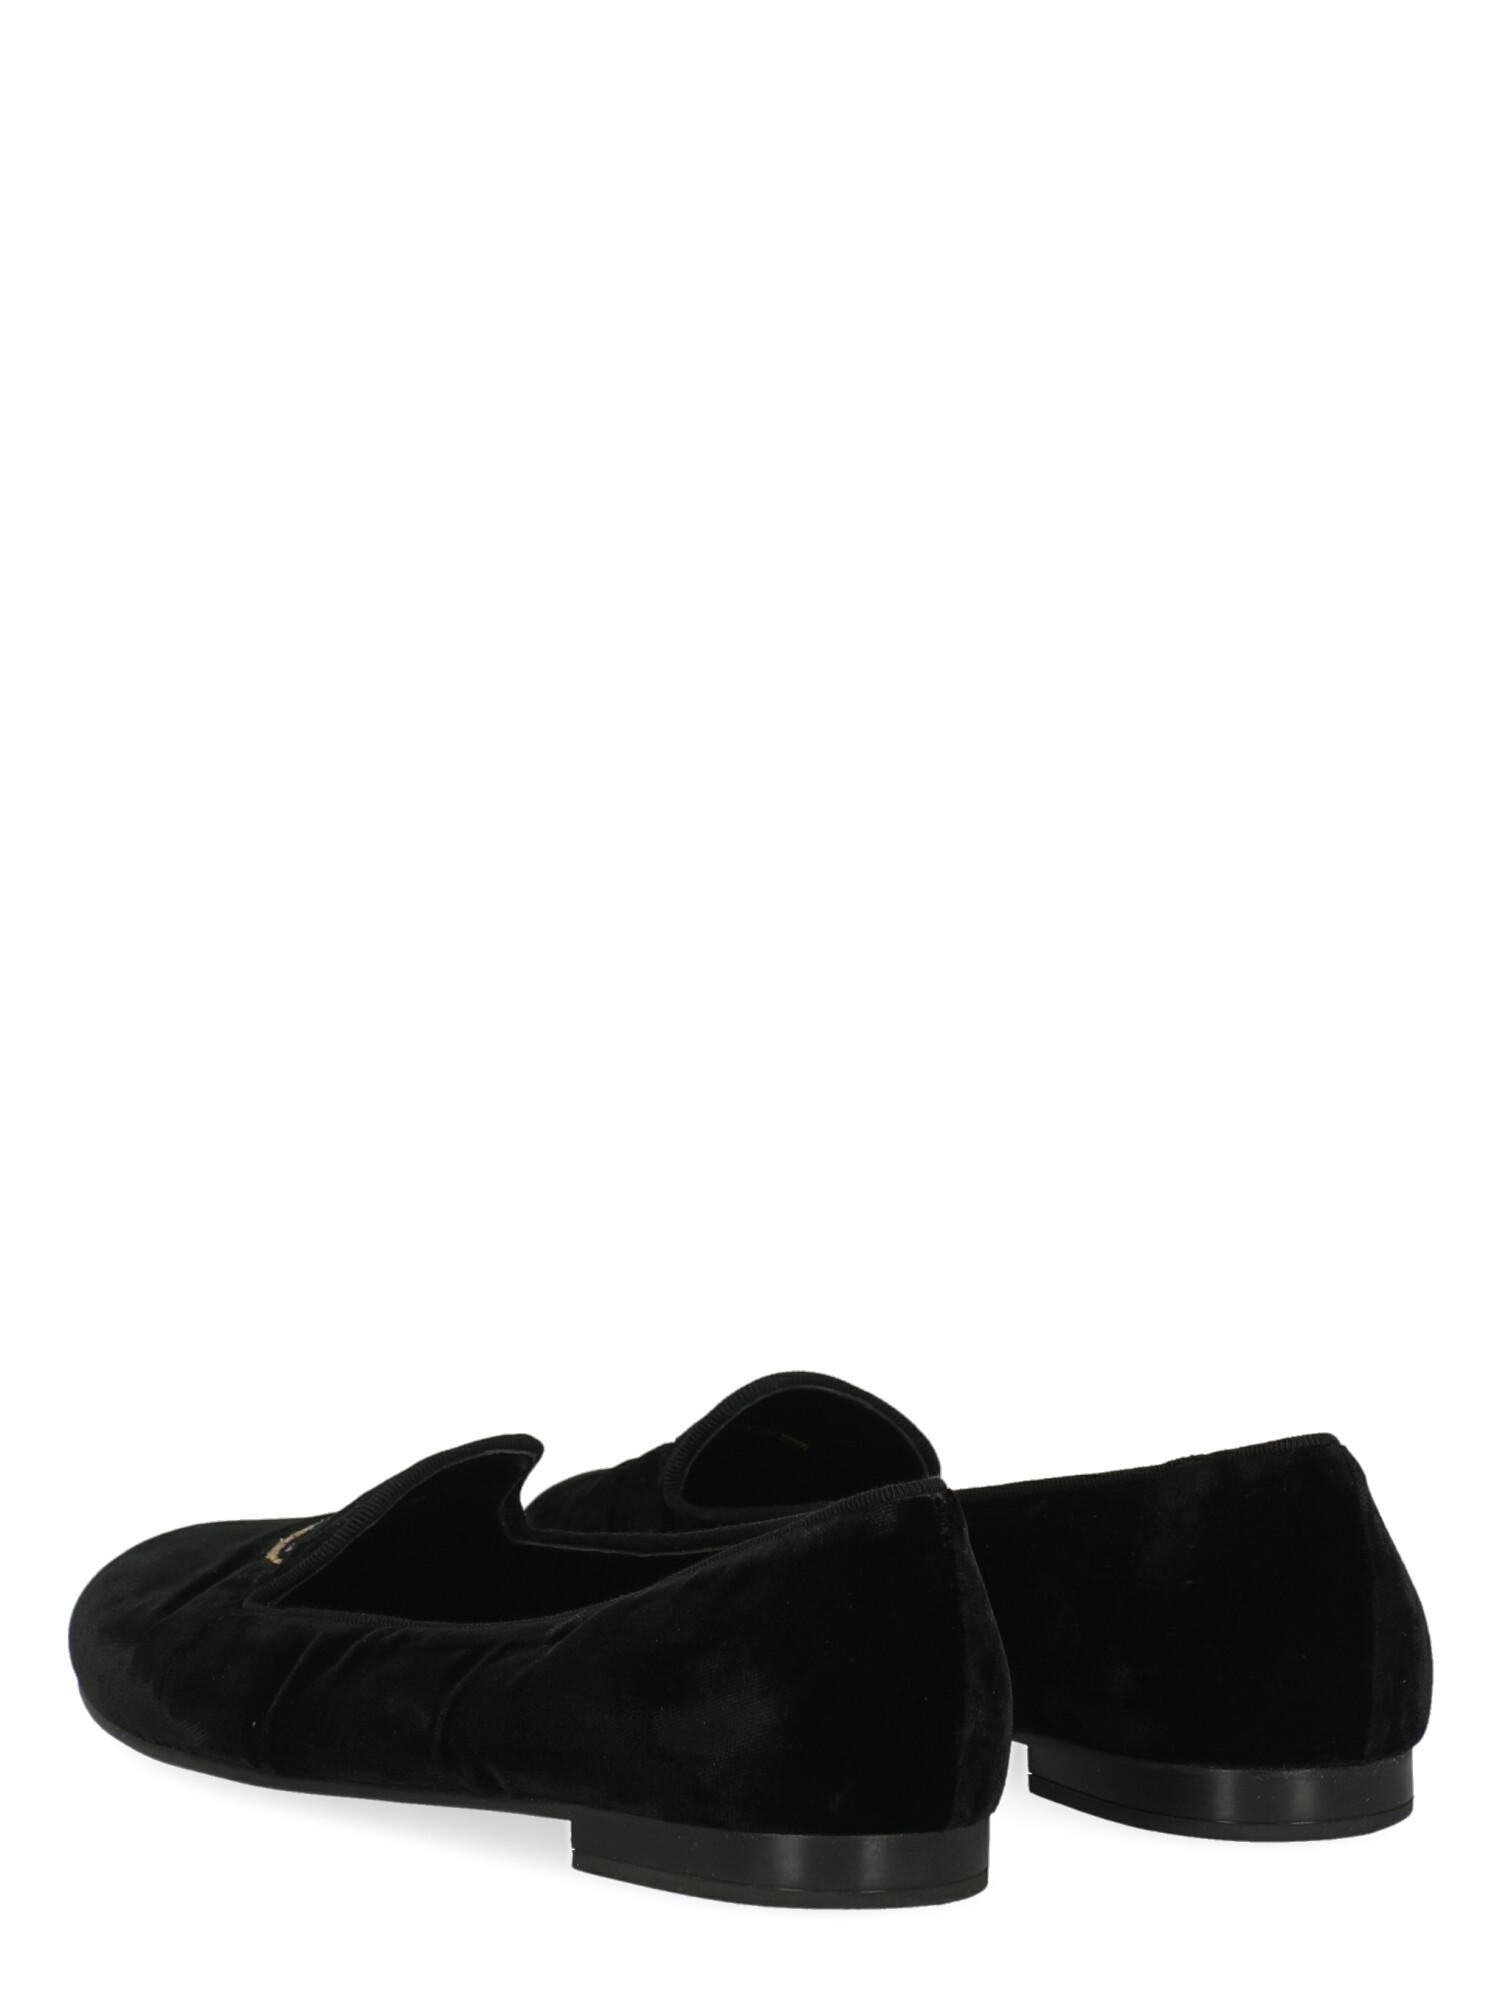 Church'S Women Ballet flats Black Fabric EU 36 In Good Condition For Sale In Milan, IT